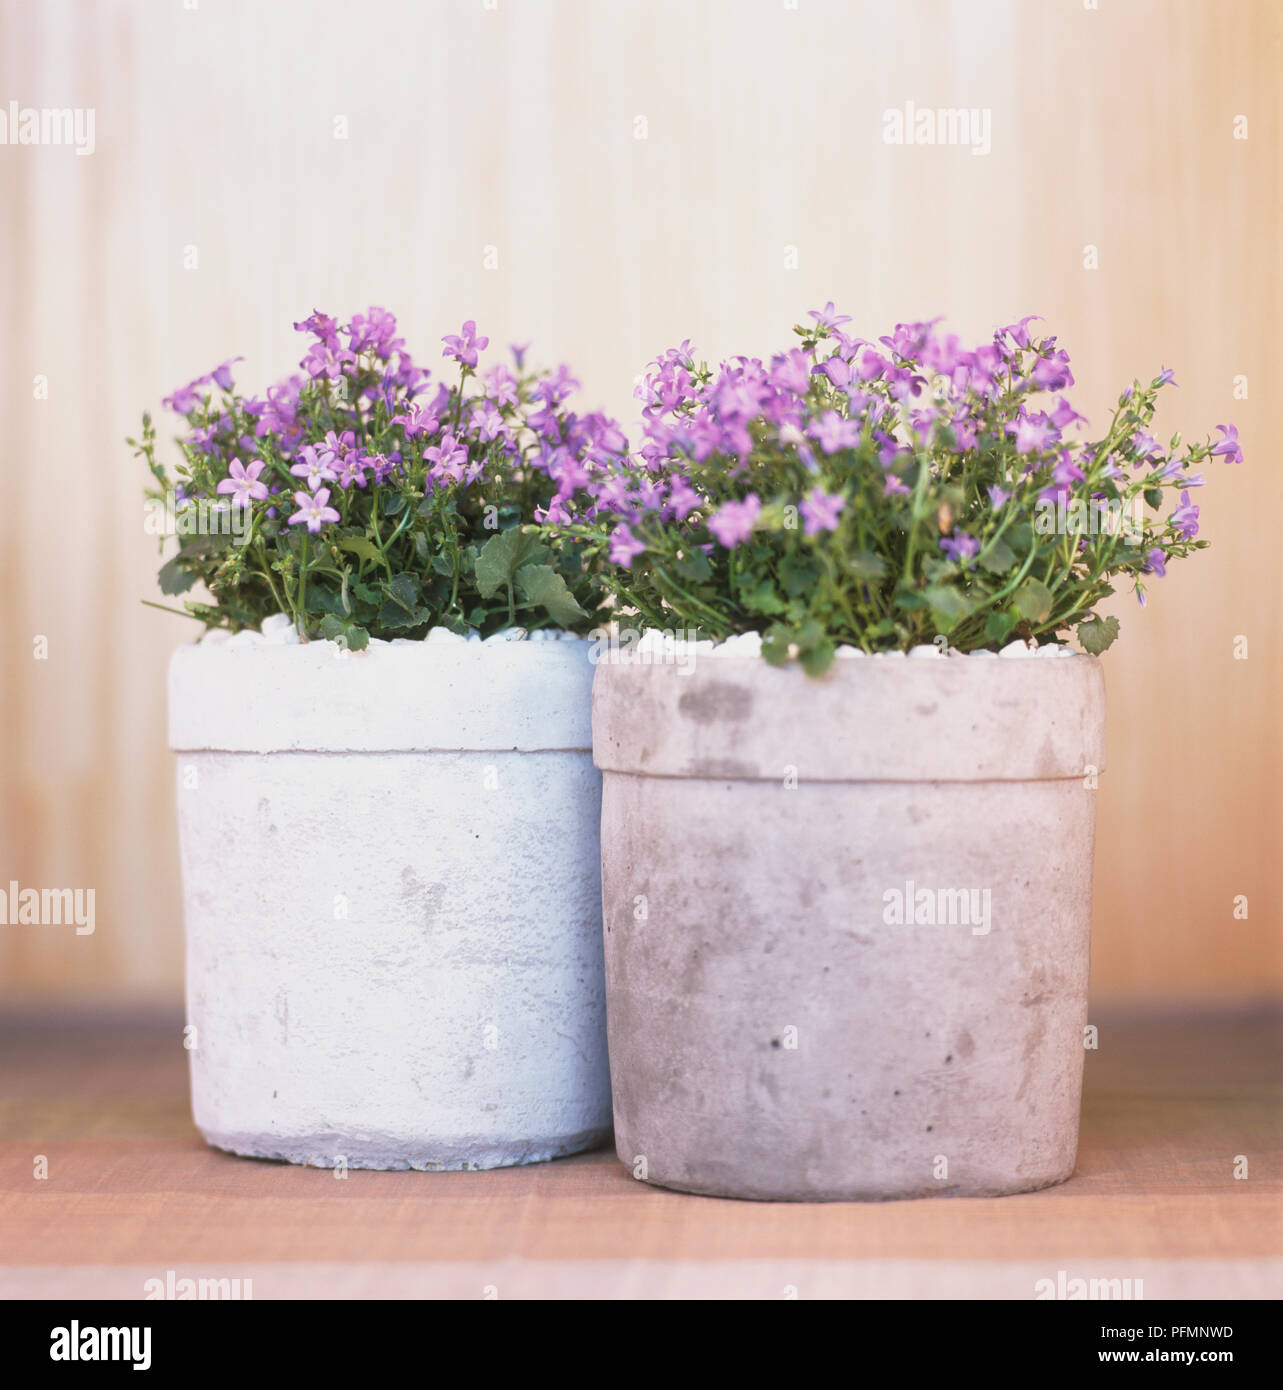 Two tall concrete pots filled with low-growing, purple Campanula sp., Bellflowers, front view. Stock Photo